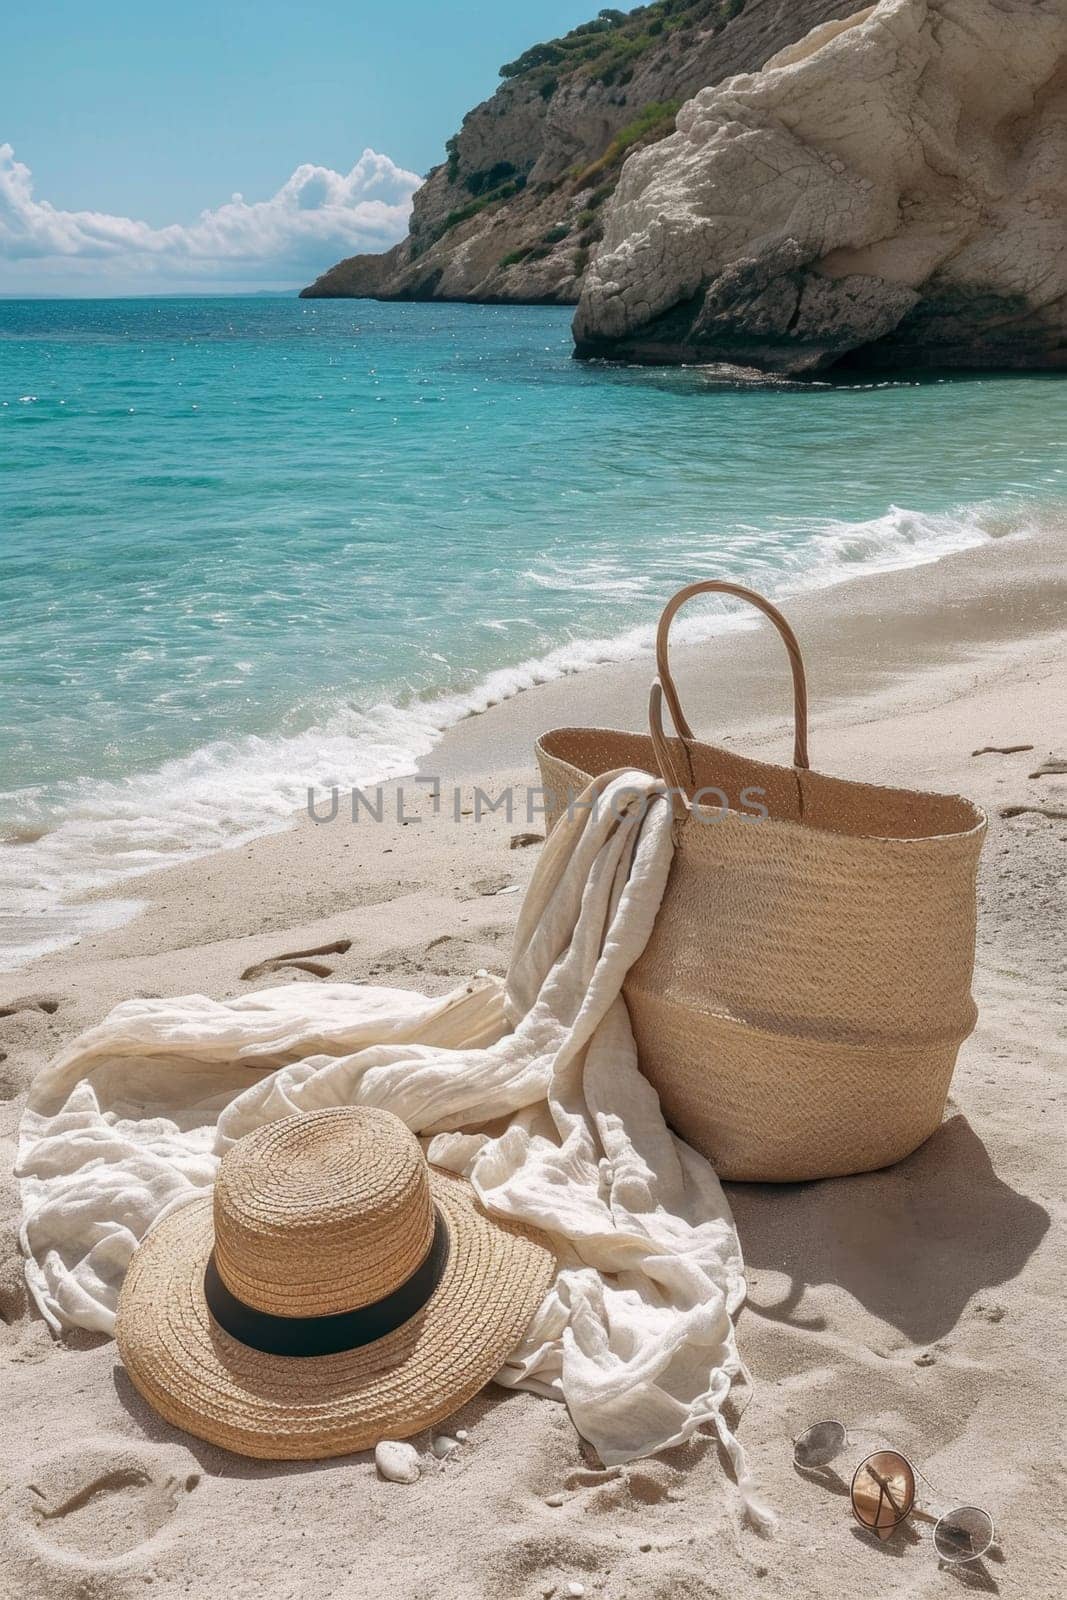 Straw hat, bag and sunglasses on a tropical beach.